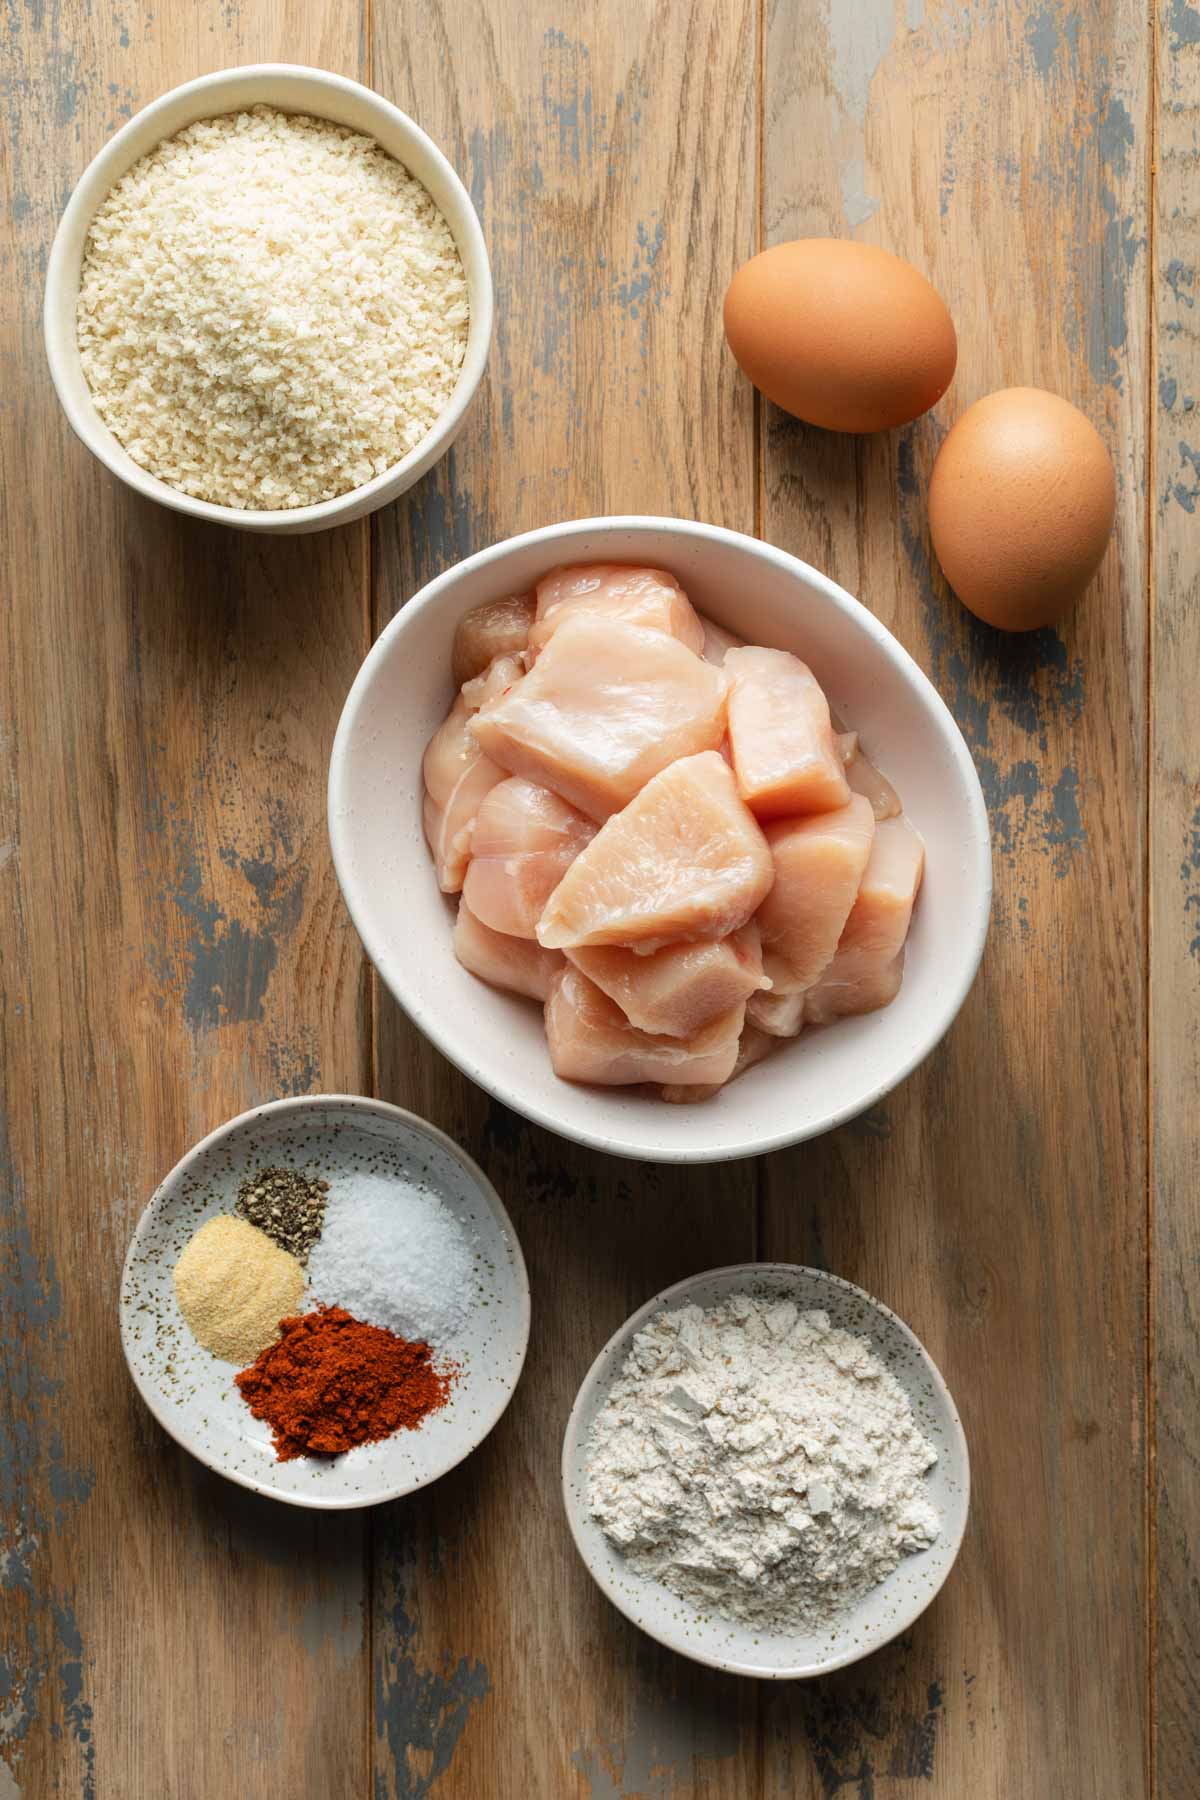 Ingredients to make breaded chicken bites arranged individually on a wooden surface.